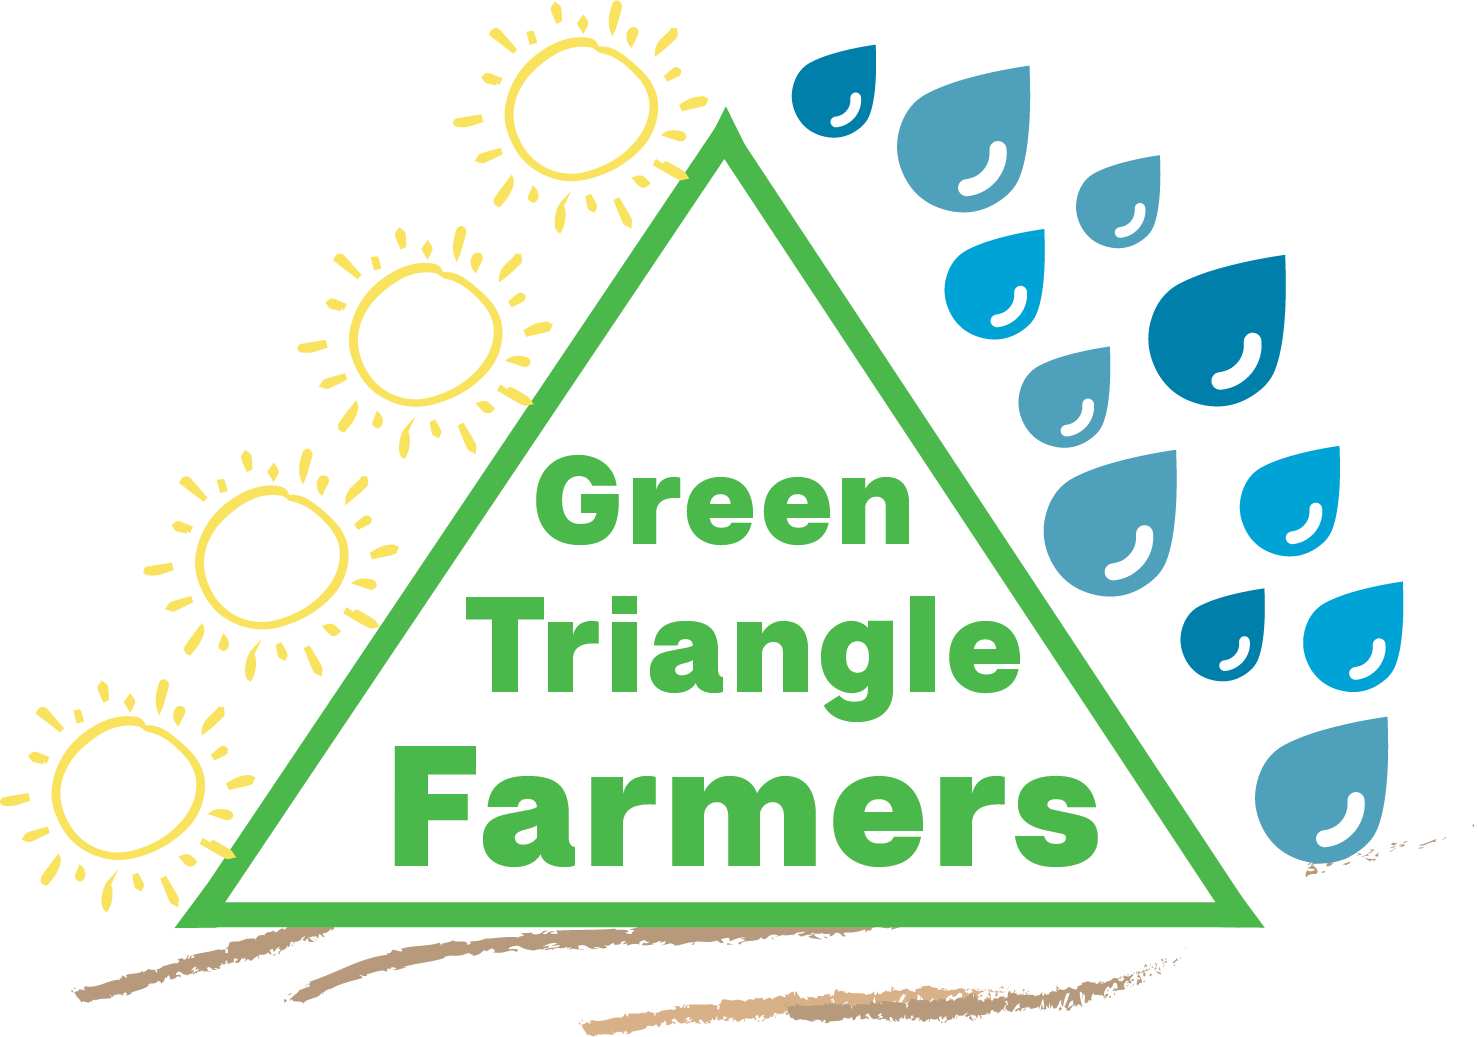 Green Triangle Farmers logo - no background.png